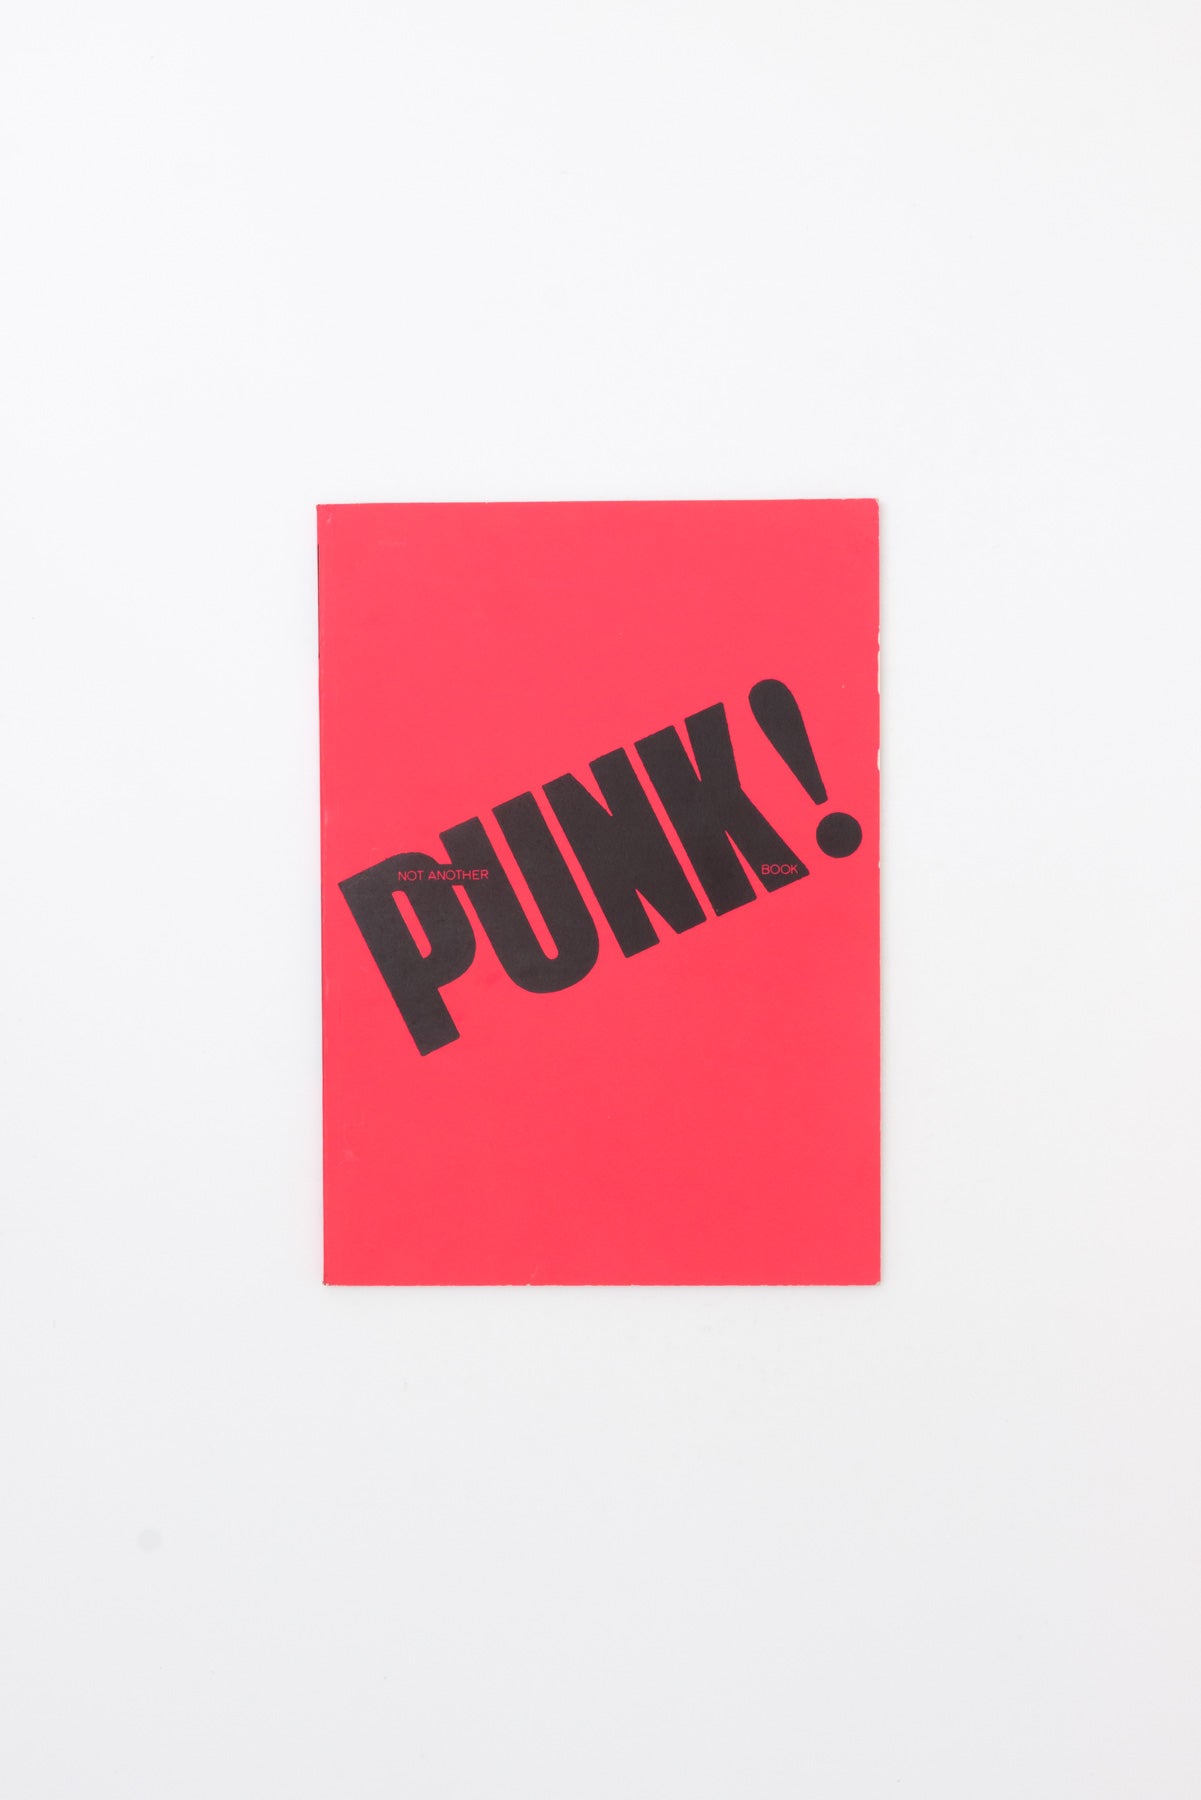 Not Another Punk Book - Isabelle Anscombe